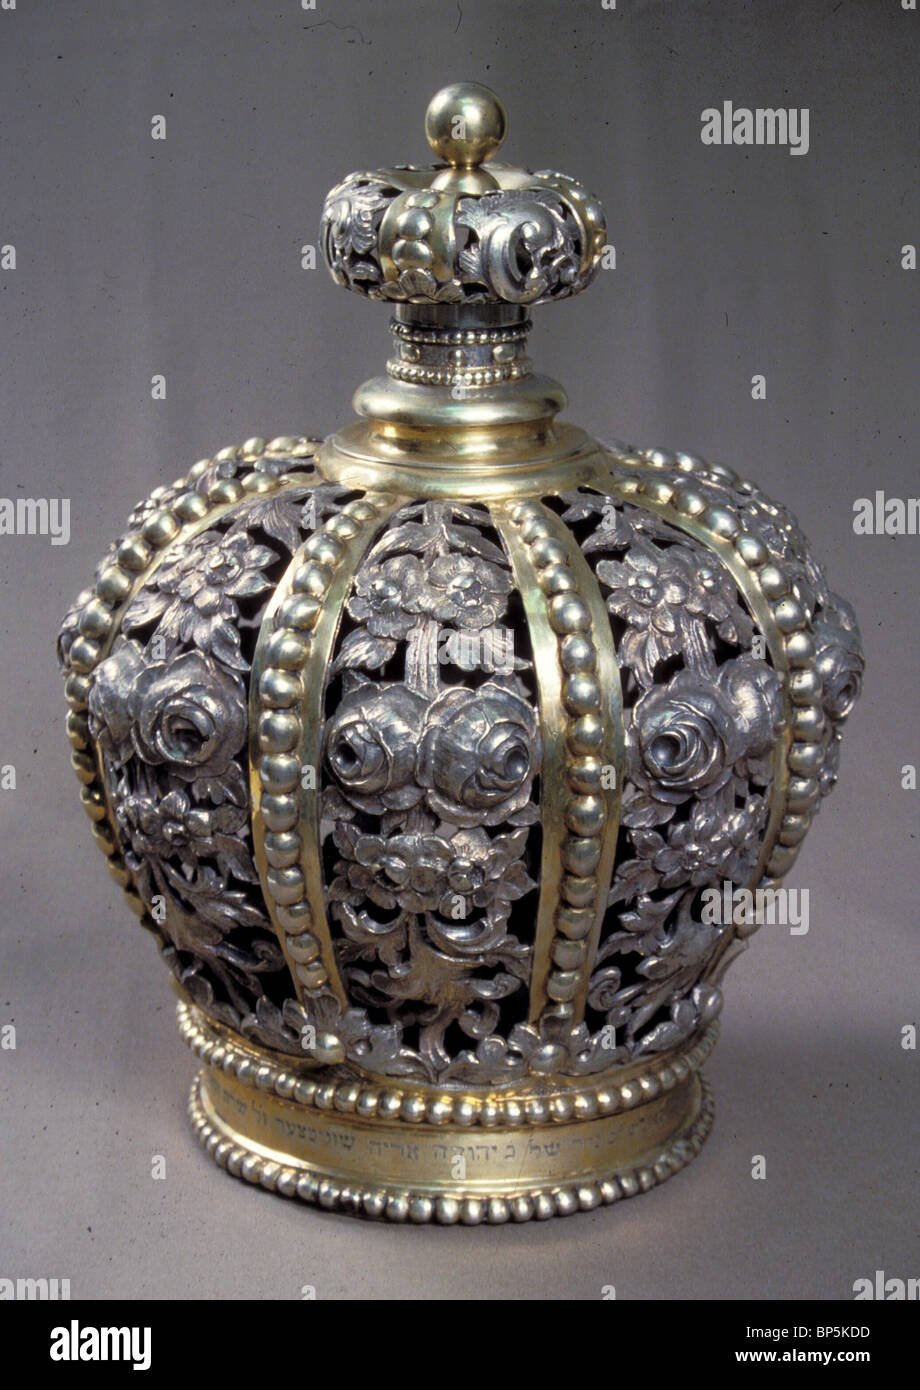 5140. TORAH CROWN, PLACED ON THE TOP OF THE TORAH SCROLL HOUSING AS DECORATION, CENTRAL EUROPE, 19TH. C. Stock Photo